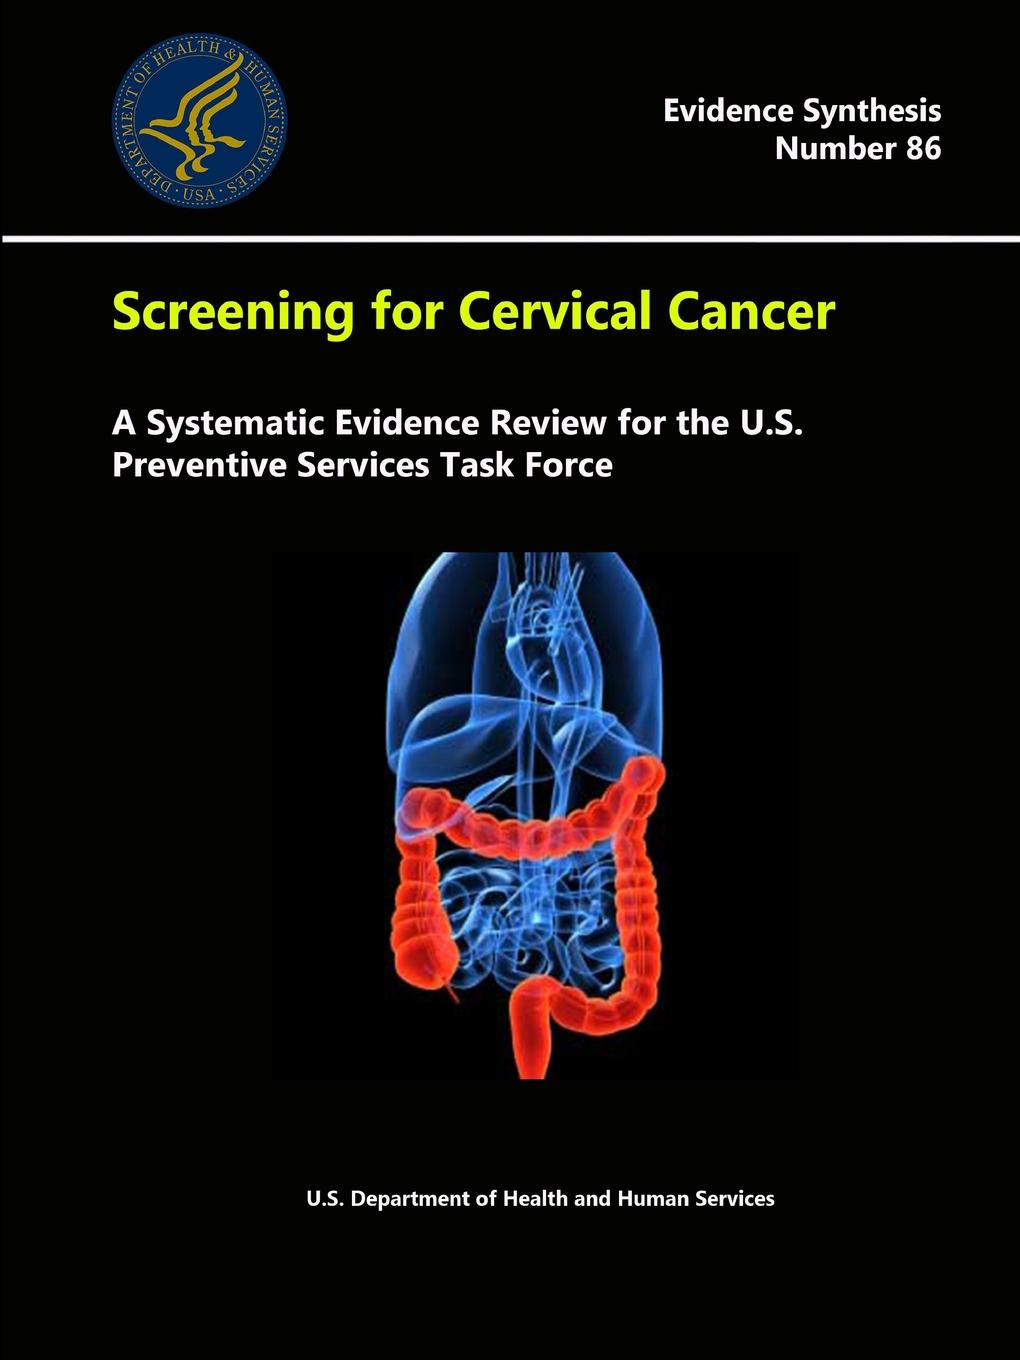 Screening for Cervical Cancer. A Systematic Evidence Review for the U.S. Preventive Services Task Force - Evidence Synthesis (Number 86)